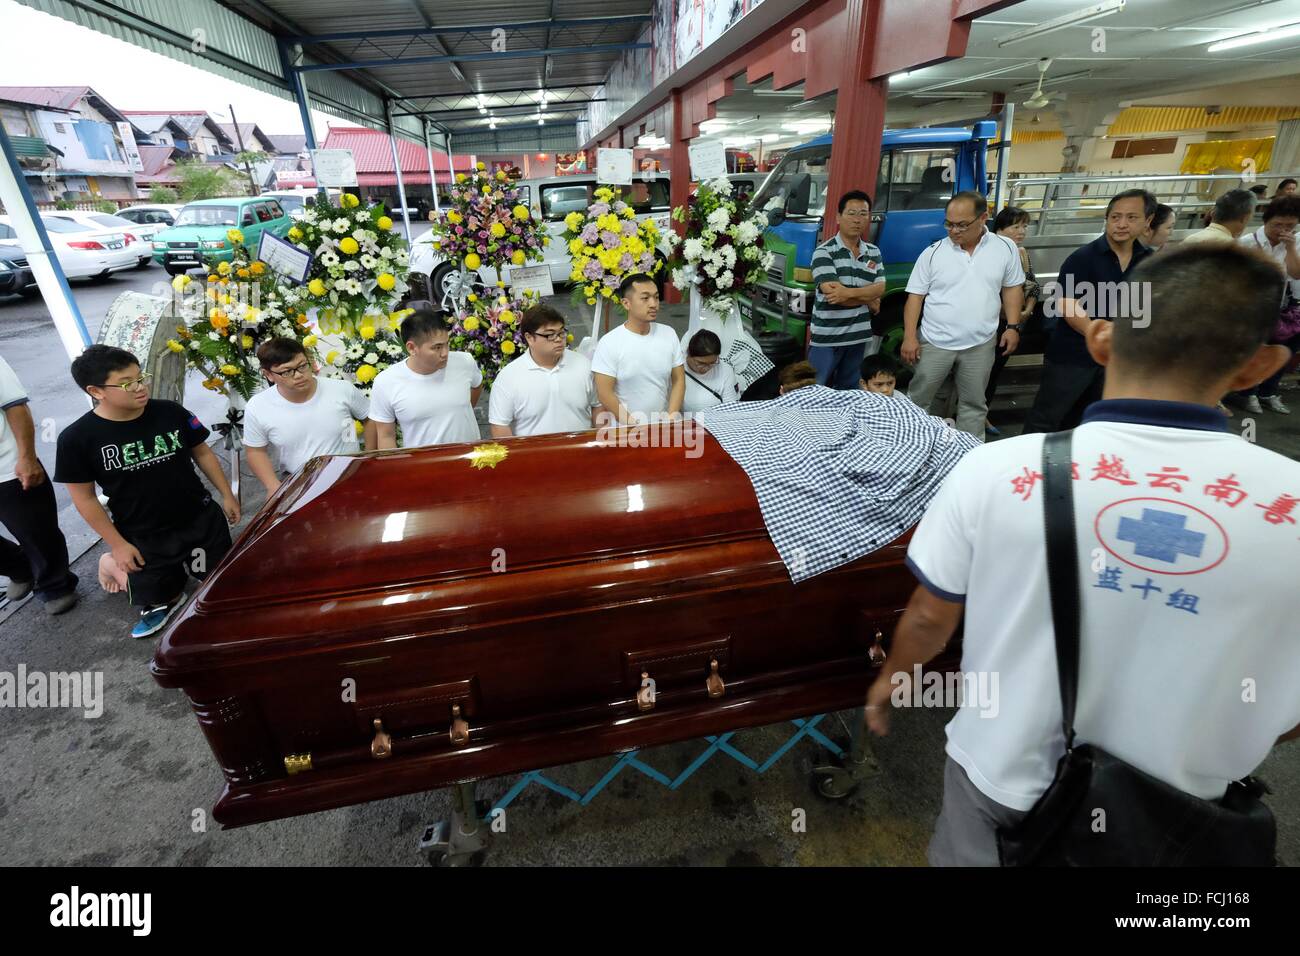 The Malaysian Chinese Funeral Ceremony Sarawakian Chinese Funeral